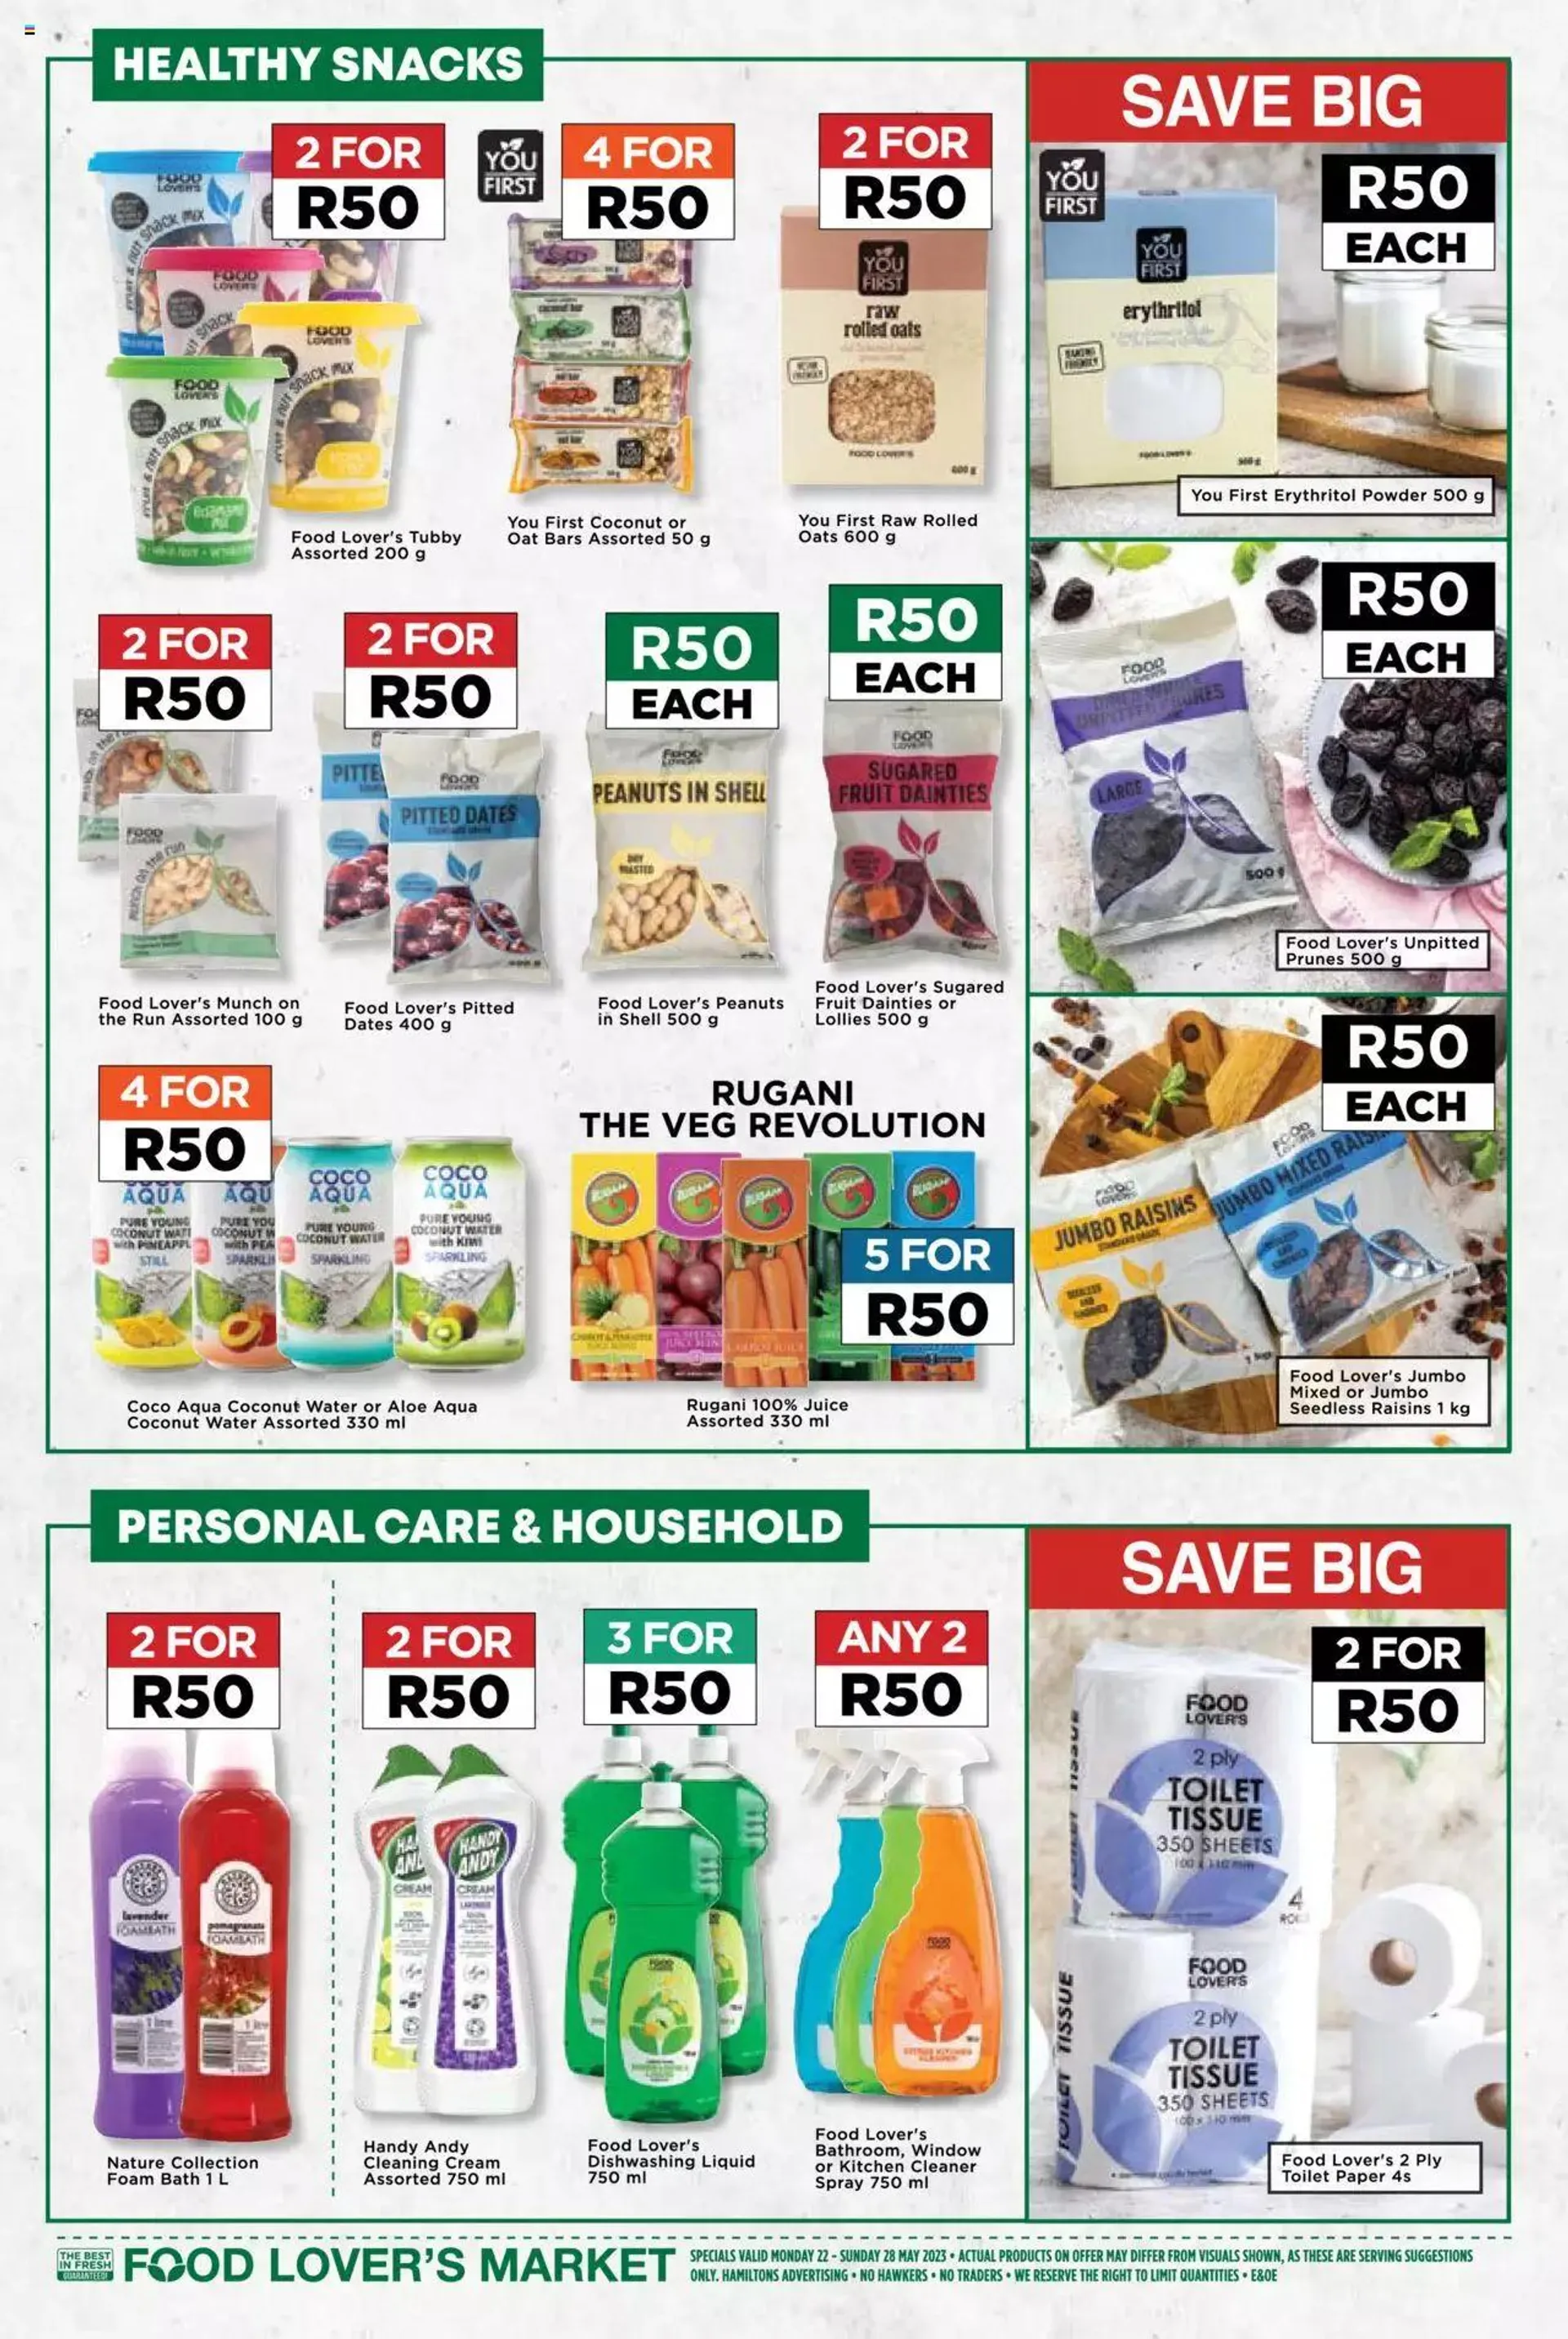 Food Lovers Market Inland Provinces - Weekly Specials - 10